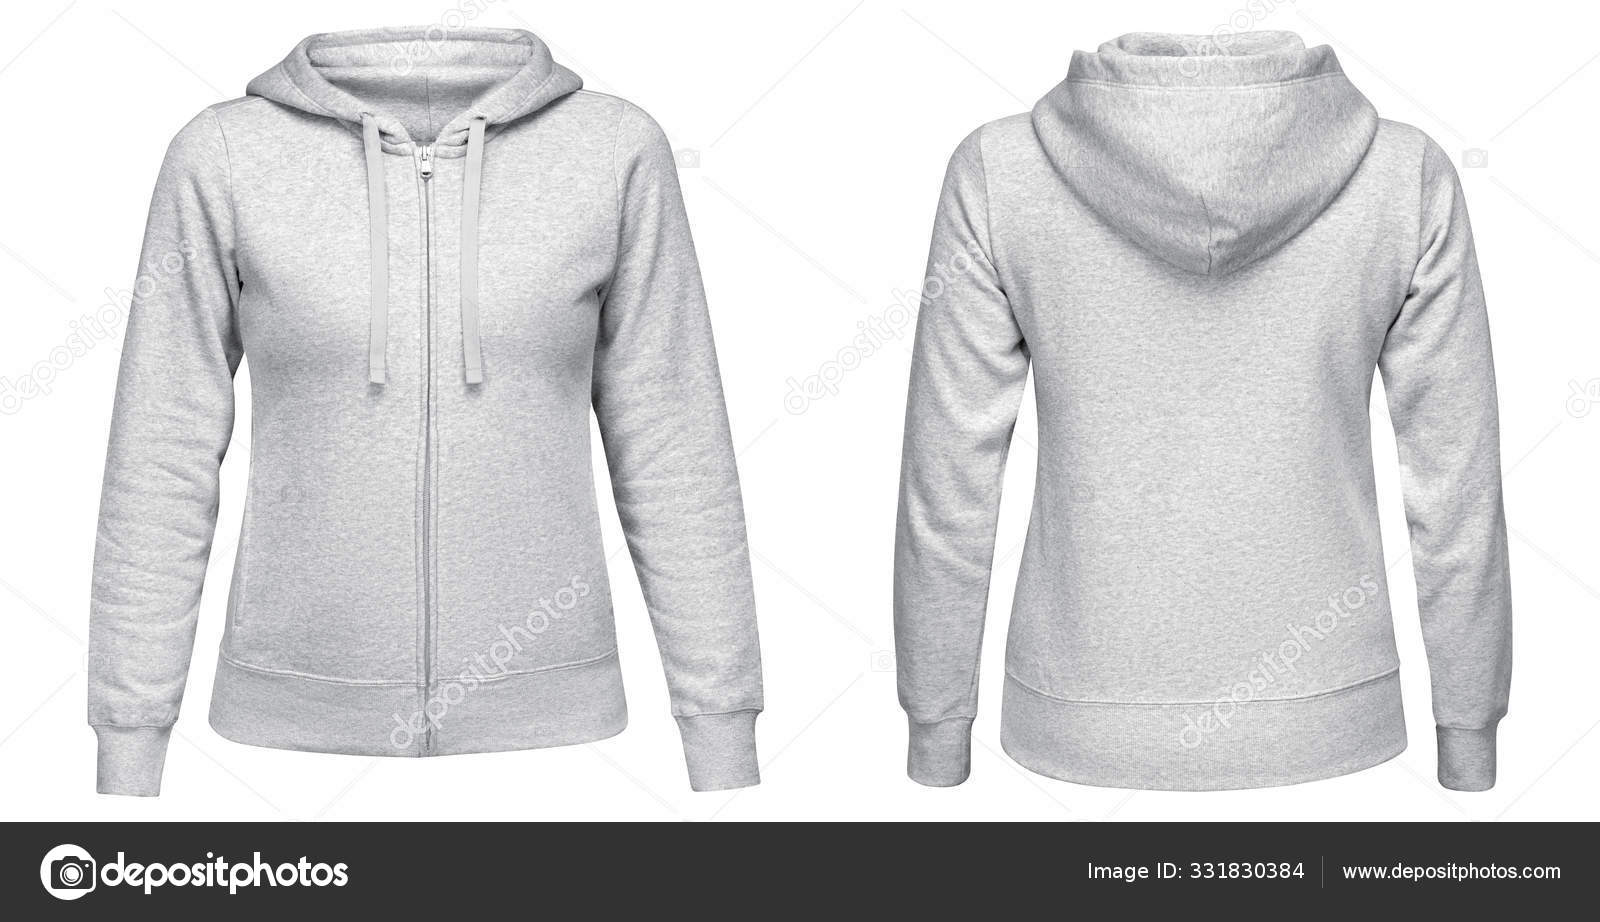 Download Gray Female Hoodie Sweatshirt With Zipper And Long Sleeve Women Hoody With Hood For Your Design Mockup For Print Isolated On White Background Template Sport Pullover Front And Back View Stock